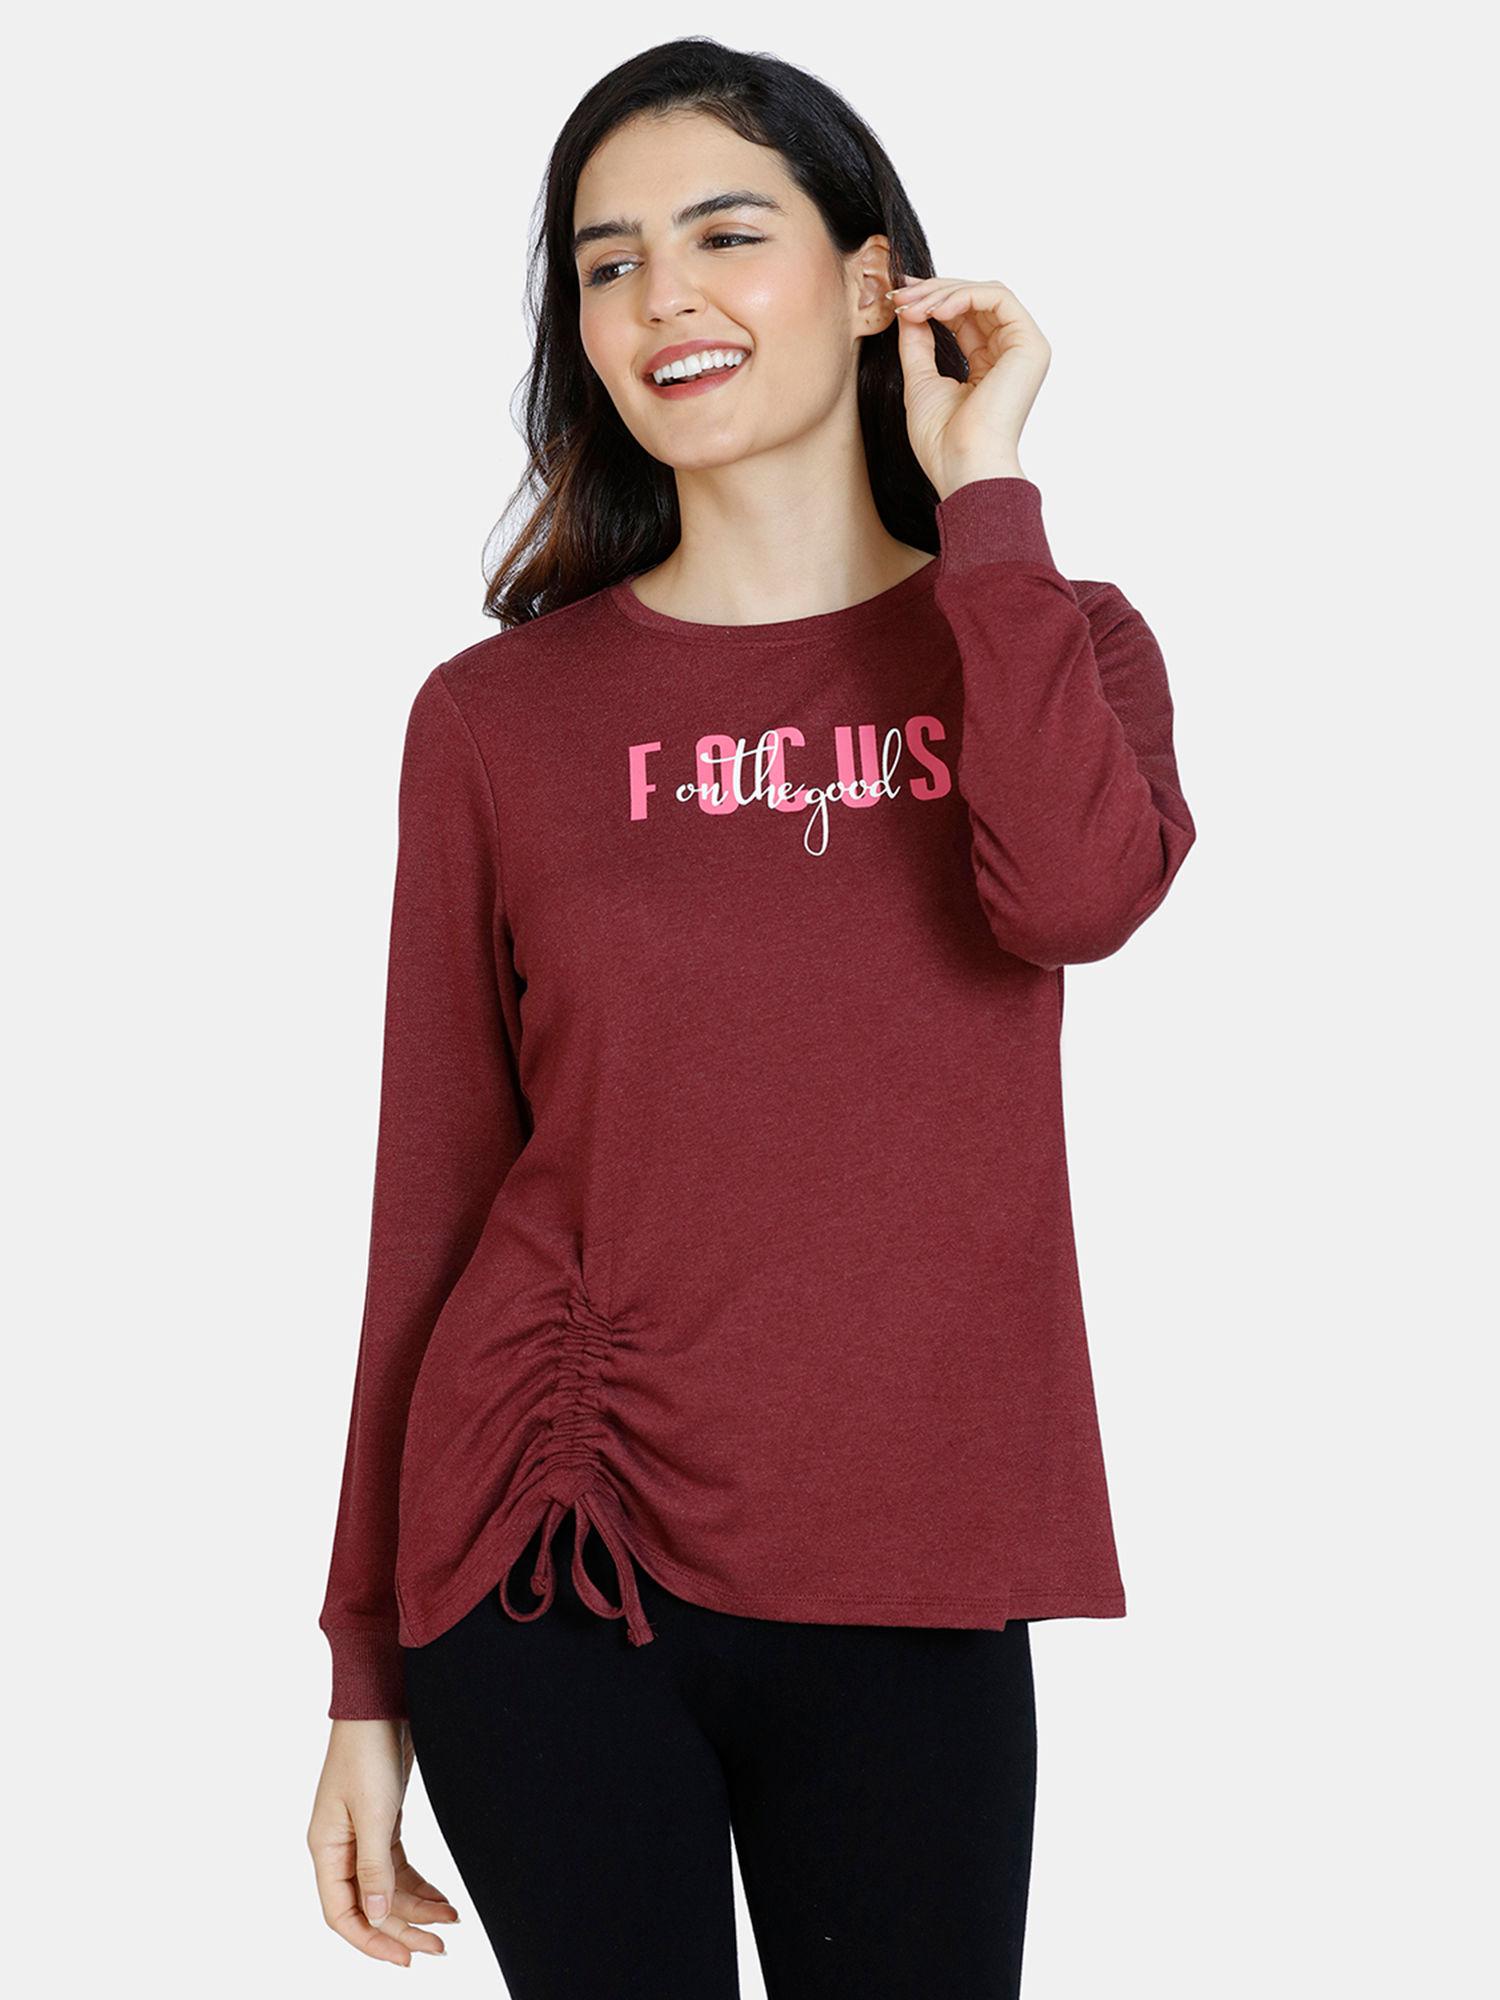 viscose knit lounge top - tawny port - red